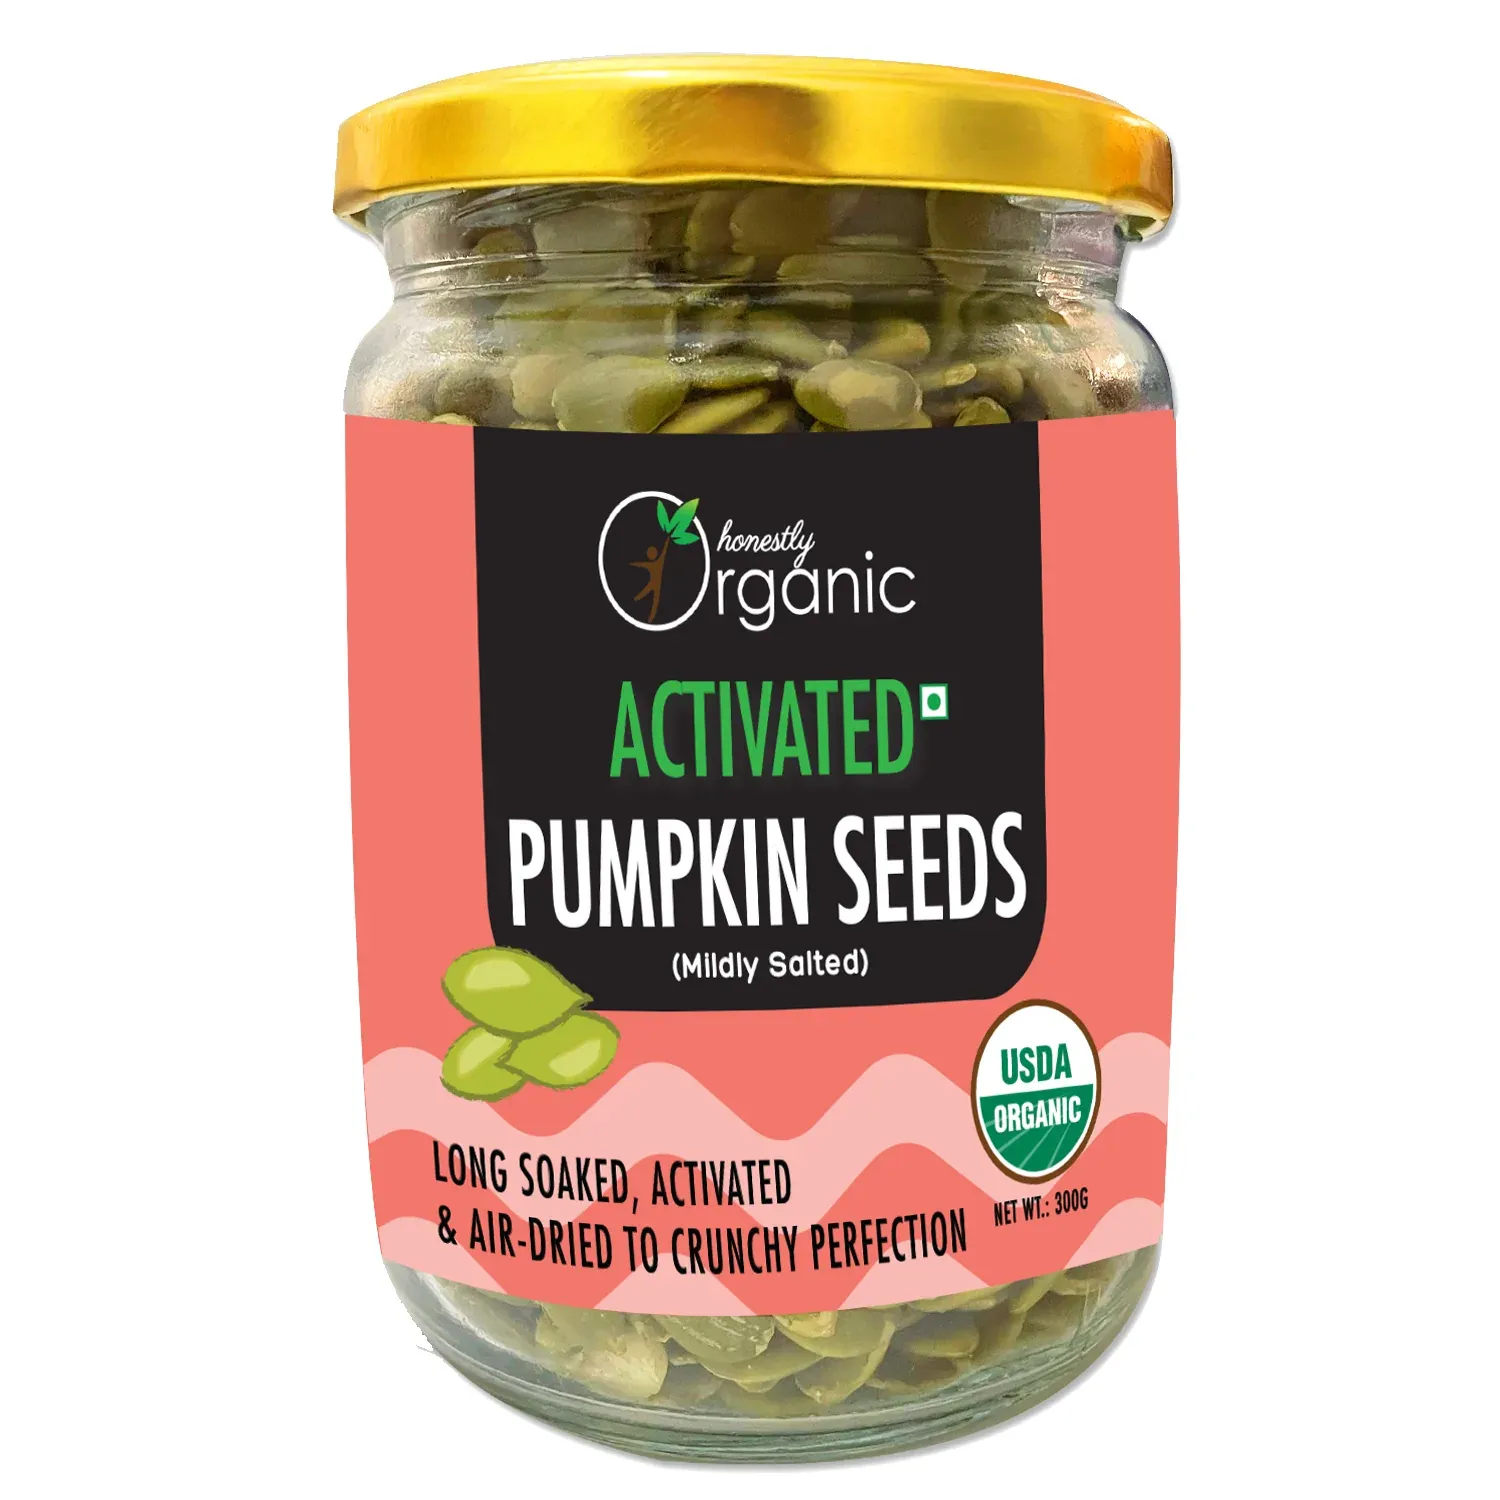 Honestly Organic Activated  Pumpkin Seeds Image